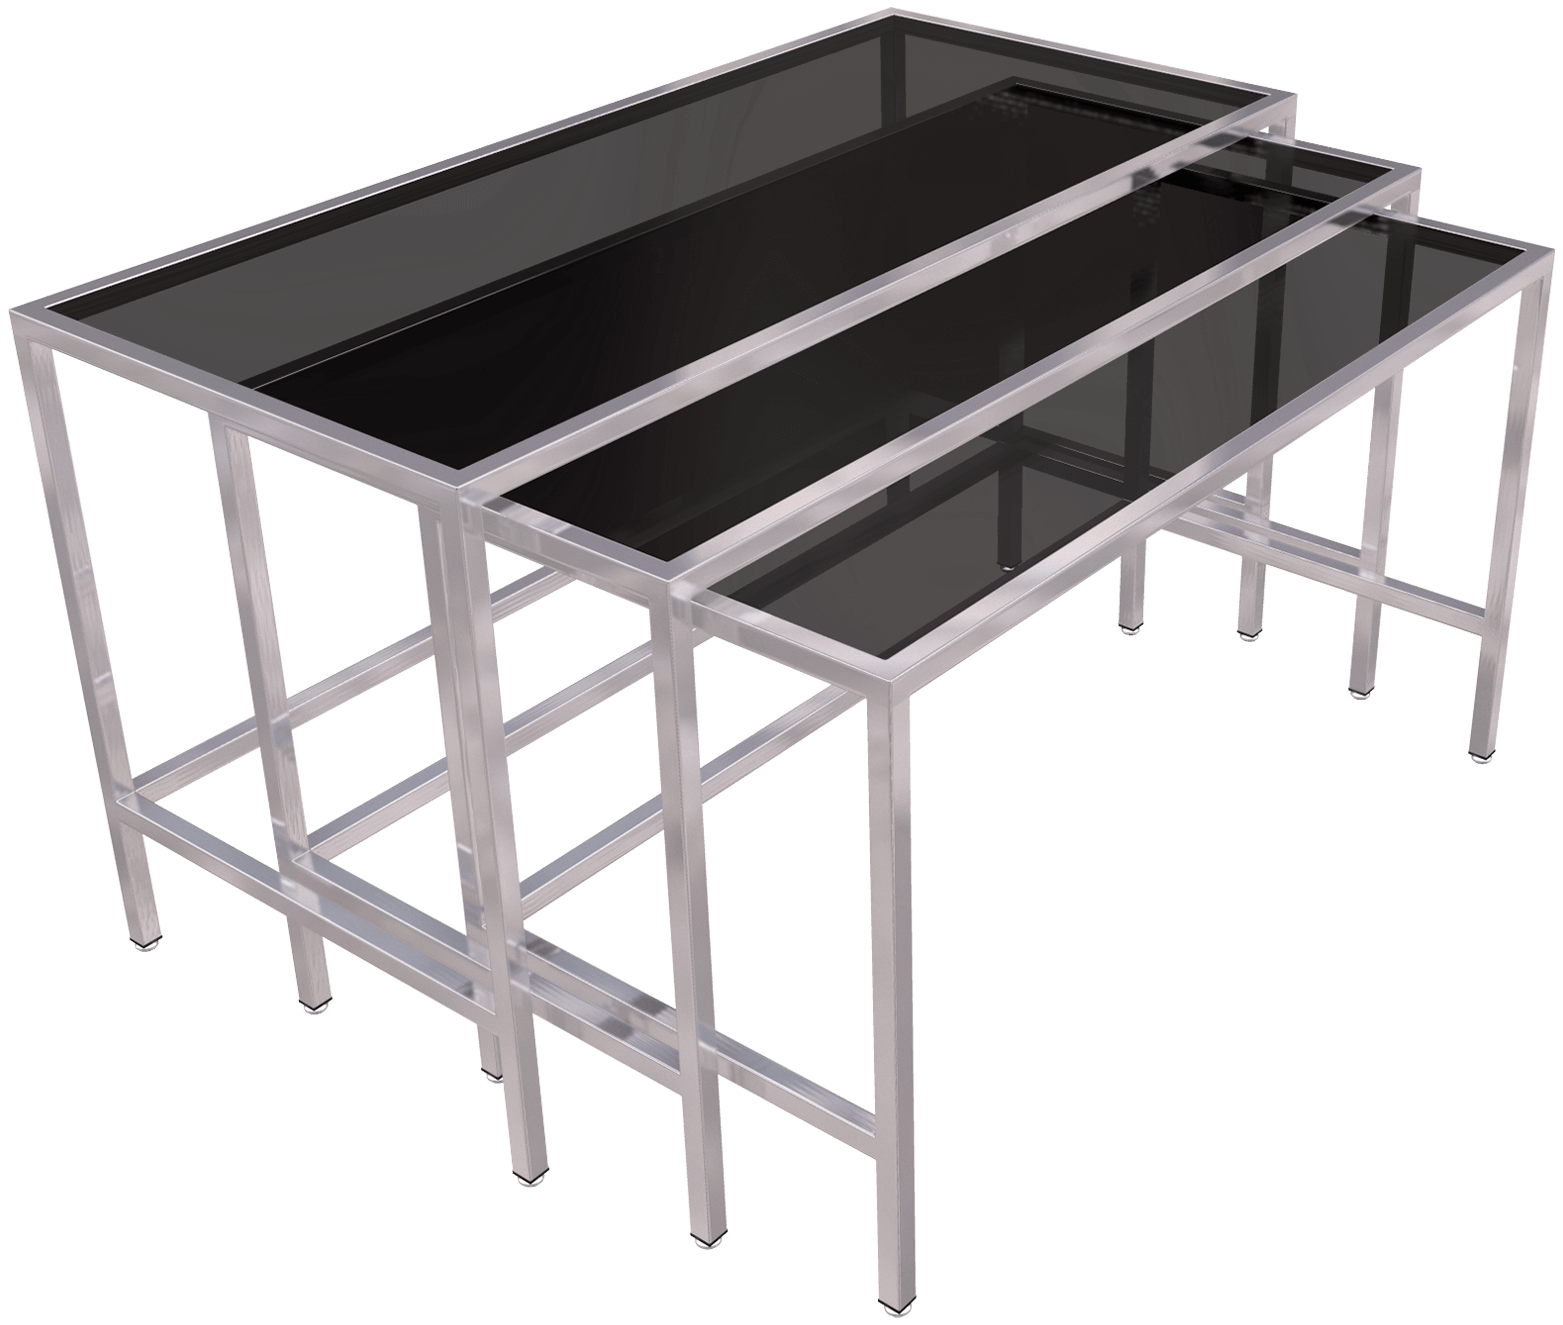 1685 COFFEE TABLE Stainless Otelsan